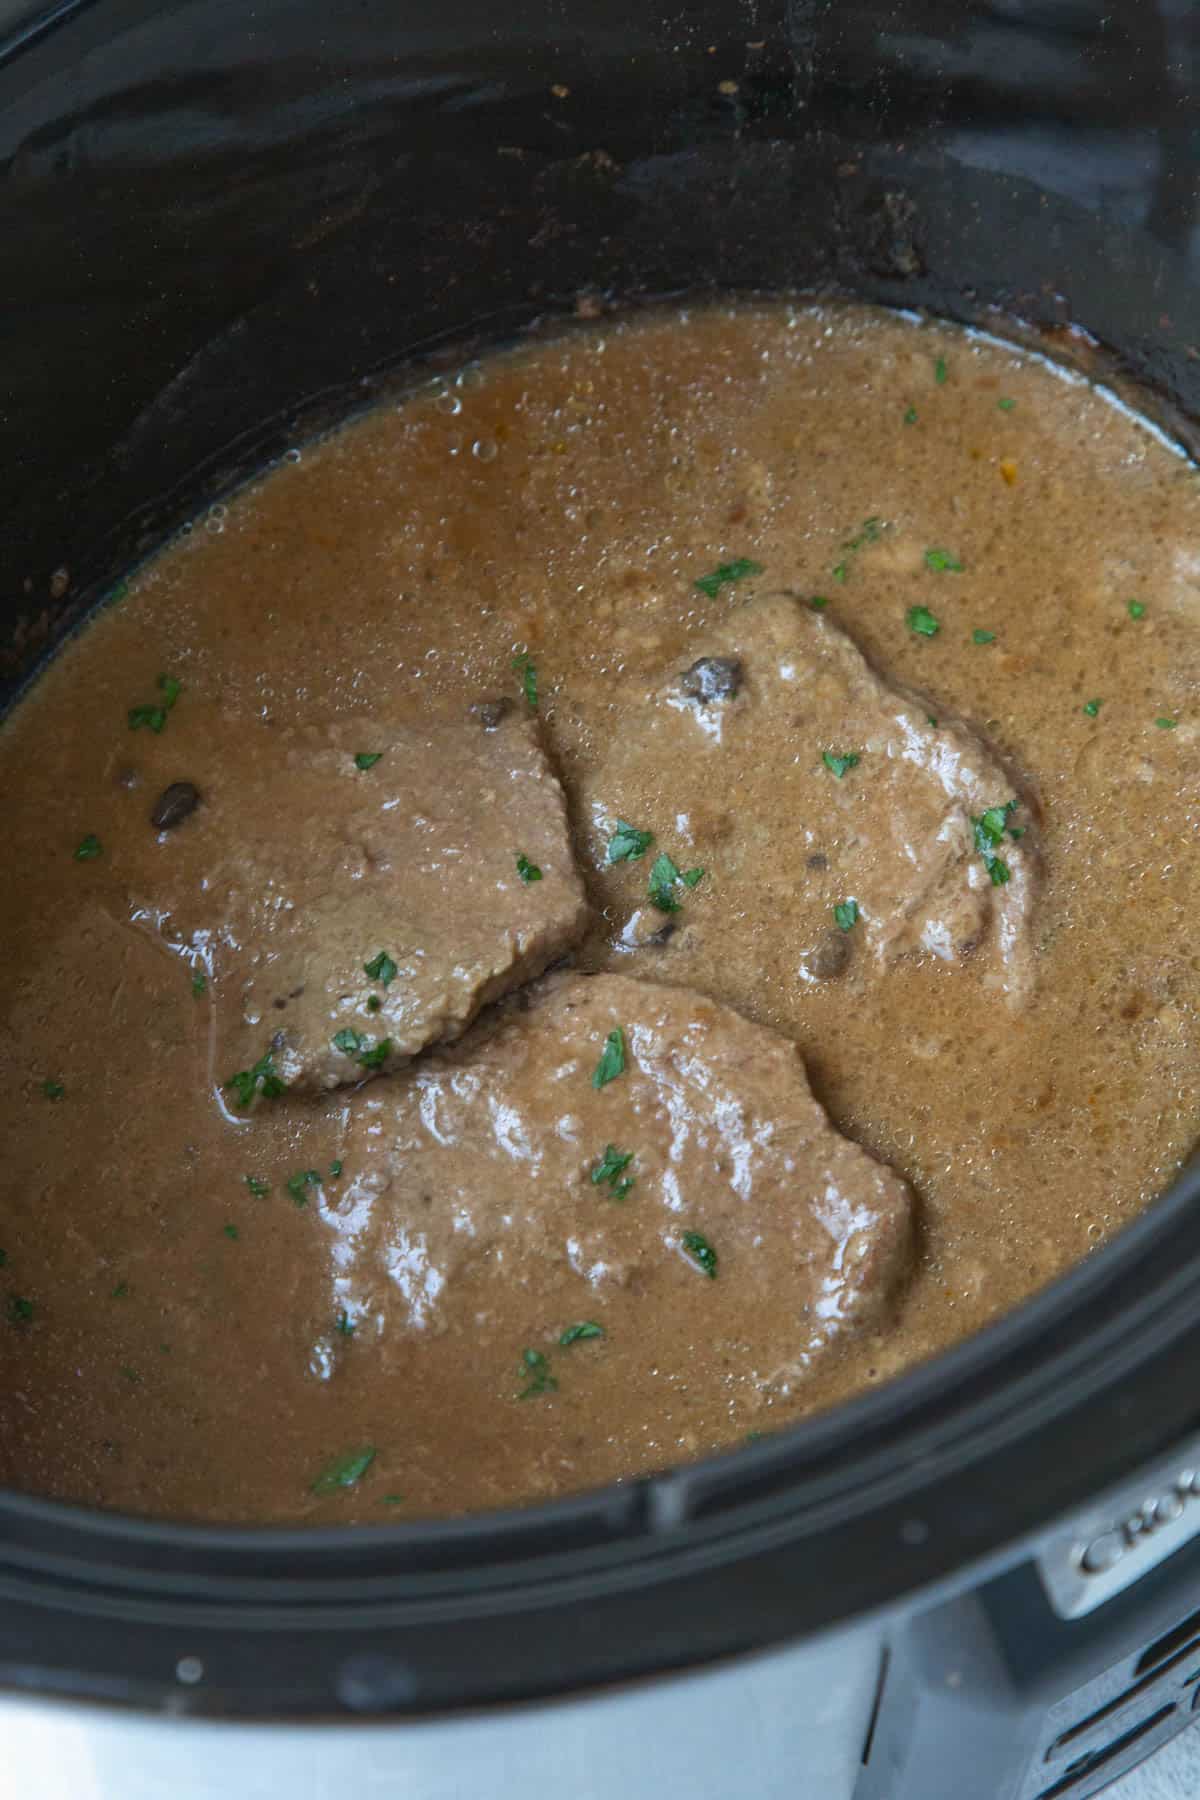 three cube steaks in a brown gravy in a slow cooker, topped with chopped parsley.